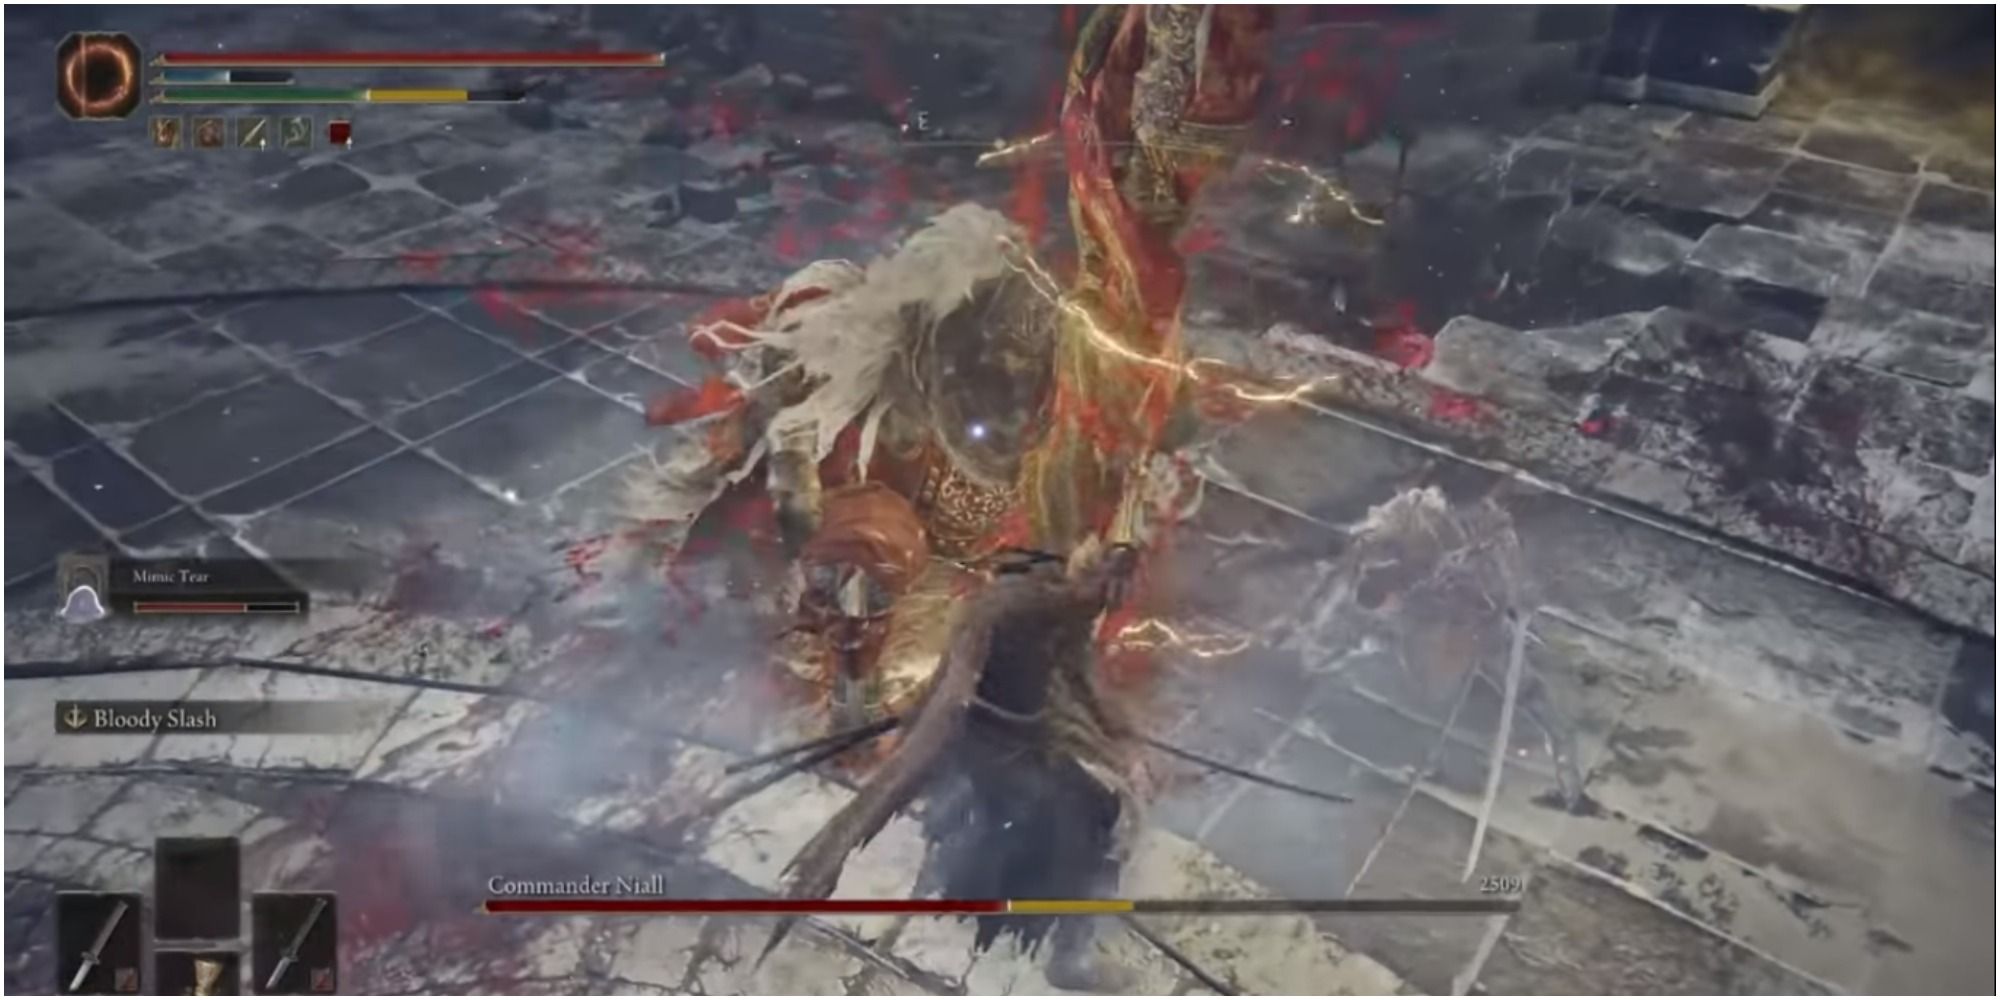 Tarnished attacking the boss with melee weapons.